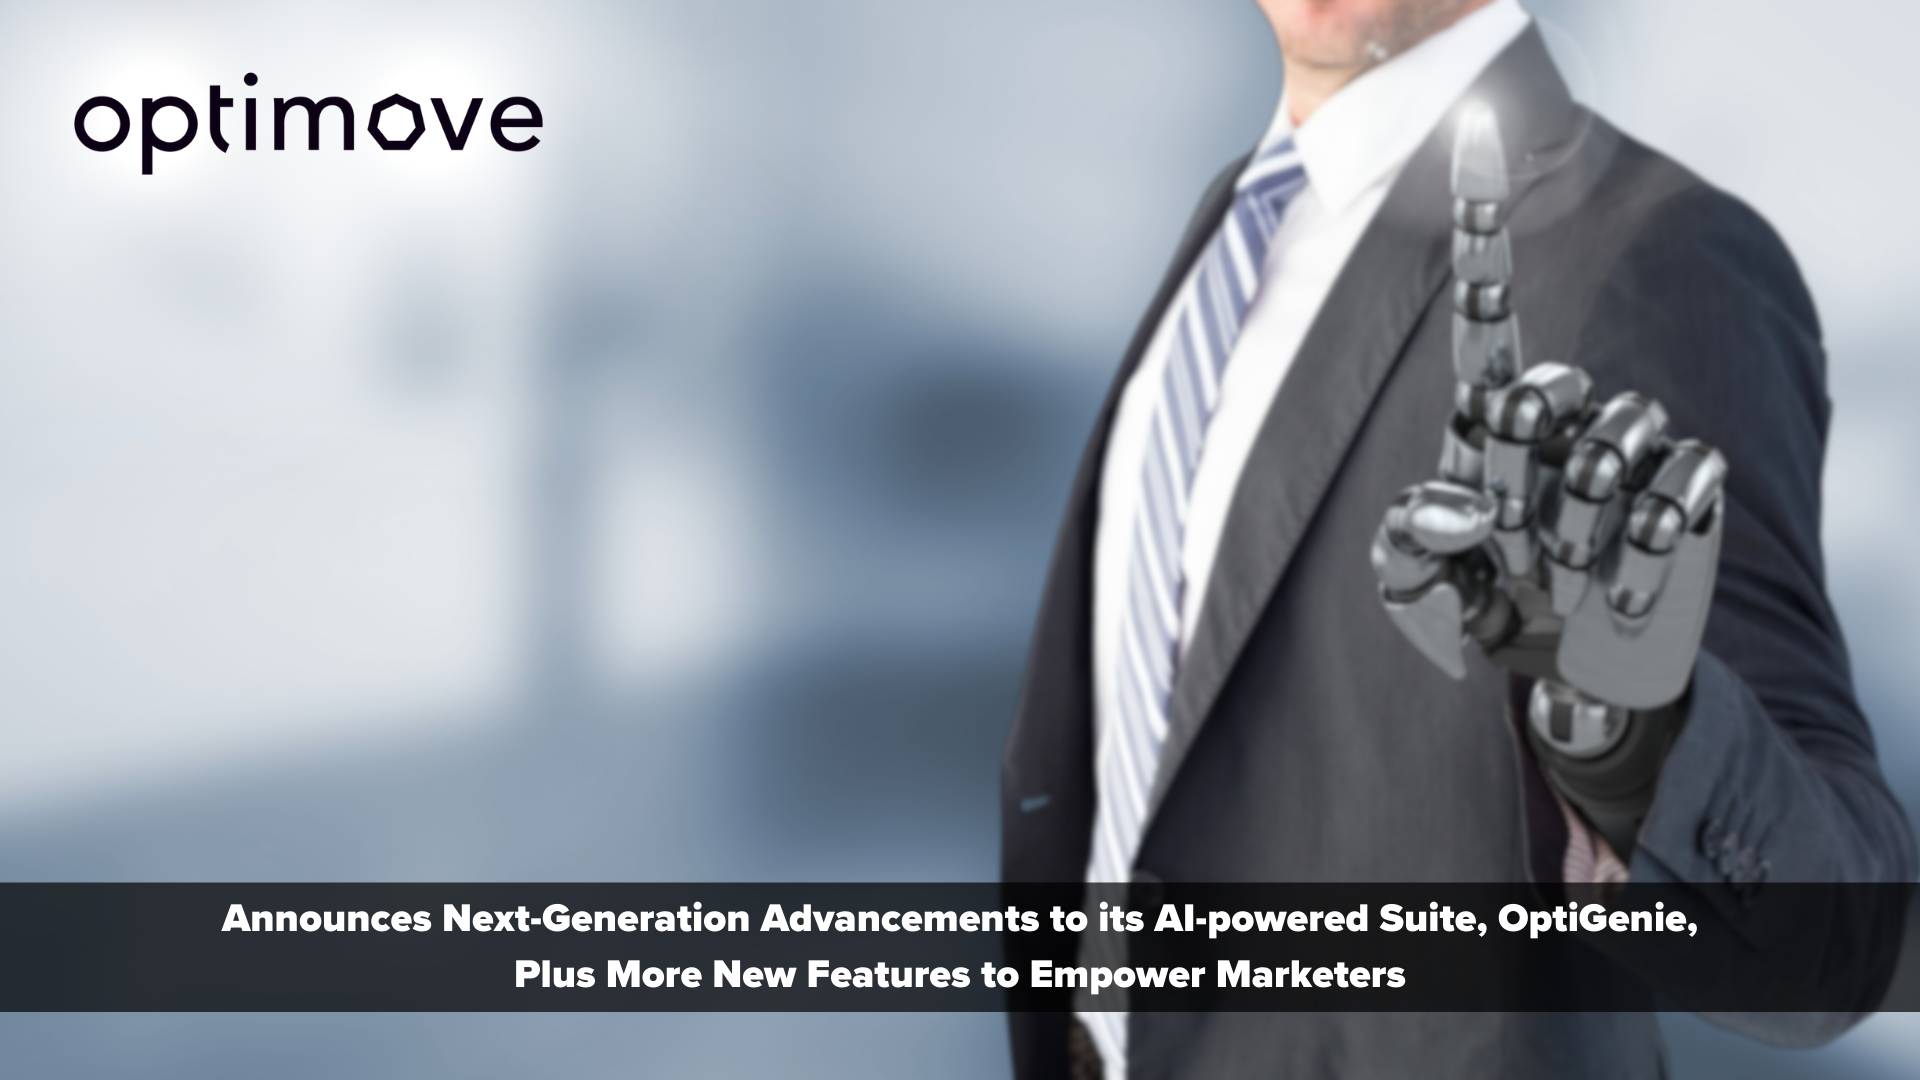 UPDATE: Optimove Announces Next-Generation Advancements to its AI-powered Suite, OptiGenie, Plus More New Features to Empower Marketers